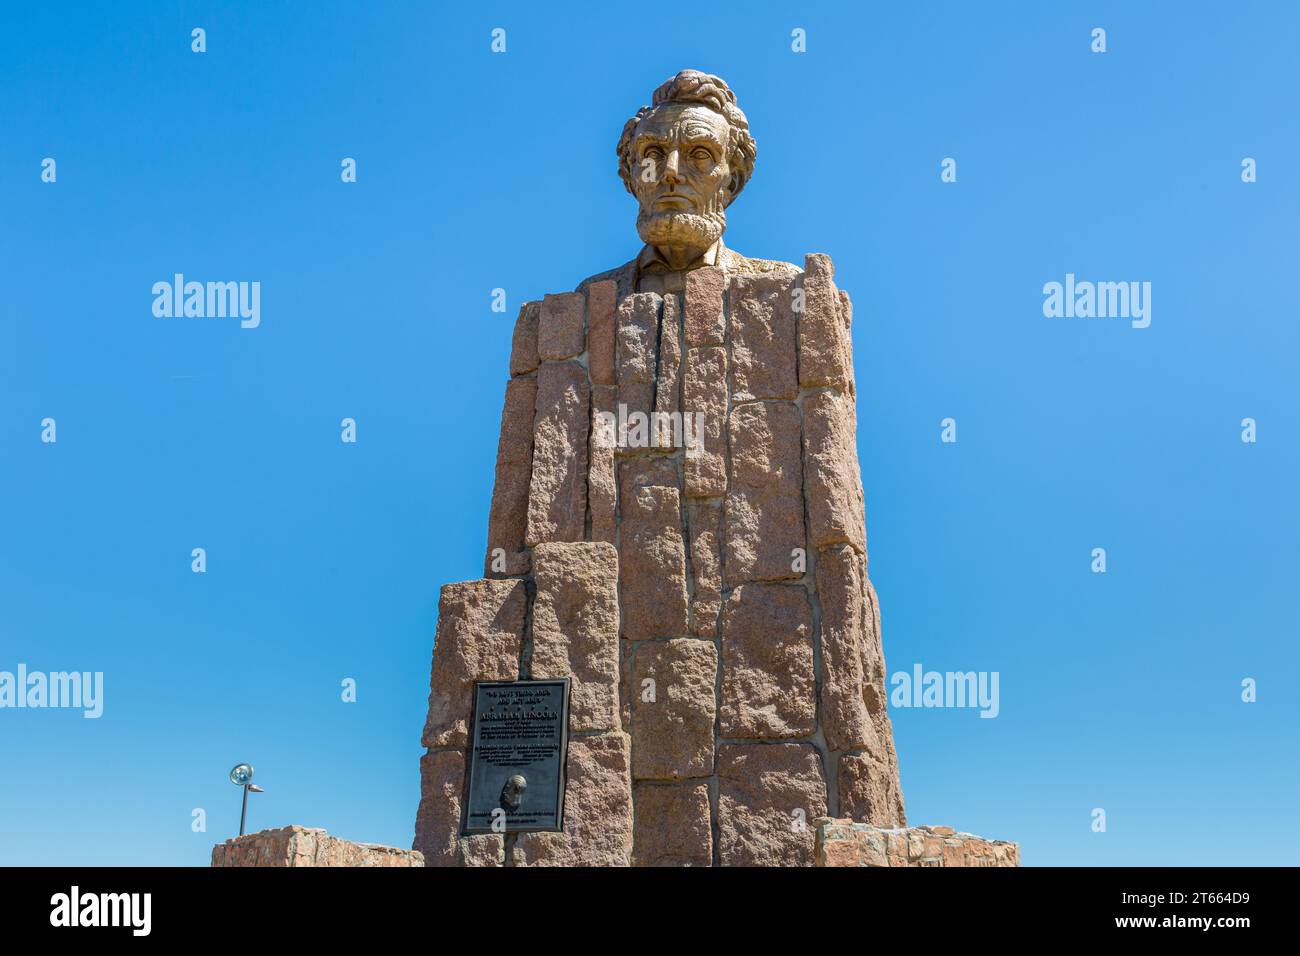 Abraham Lincoln memorial monument sculpted by Robert Russin at the Summit Rest Area along Interstate 80 between Laramie and Cheyenne, Wyoming Stock Photo